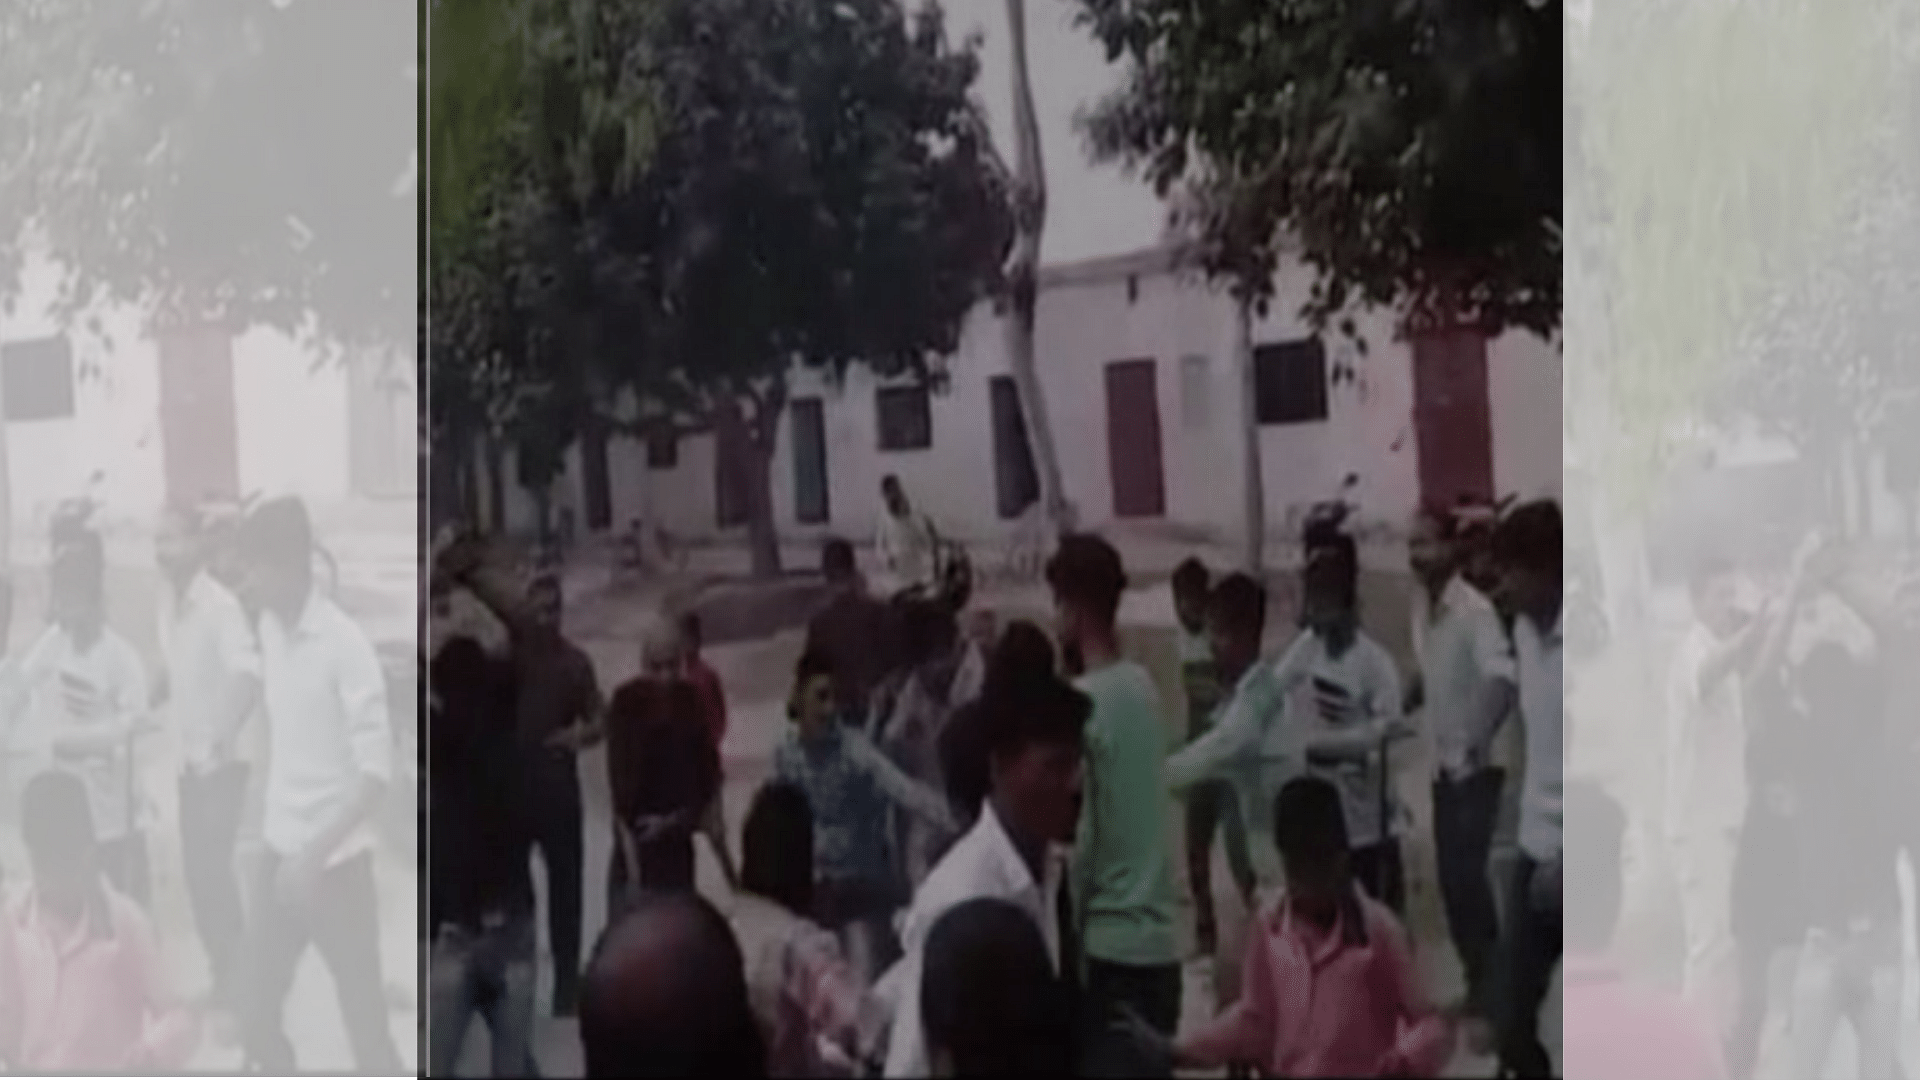 A teacher was thrashed by students and their guardians at Prayagraj